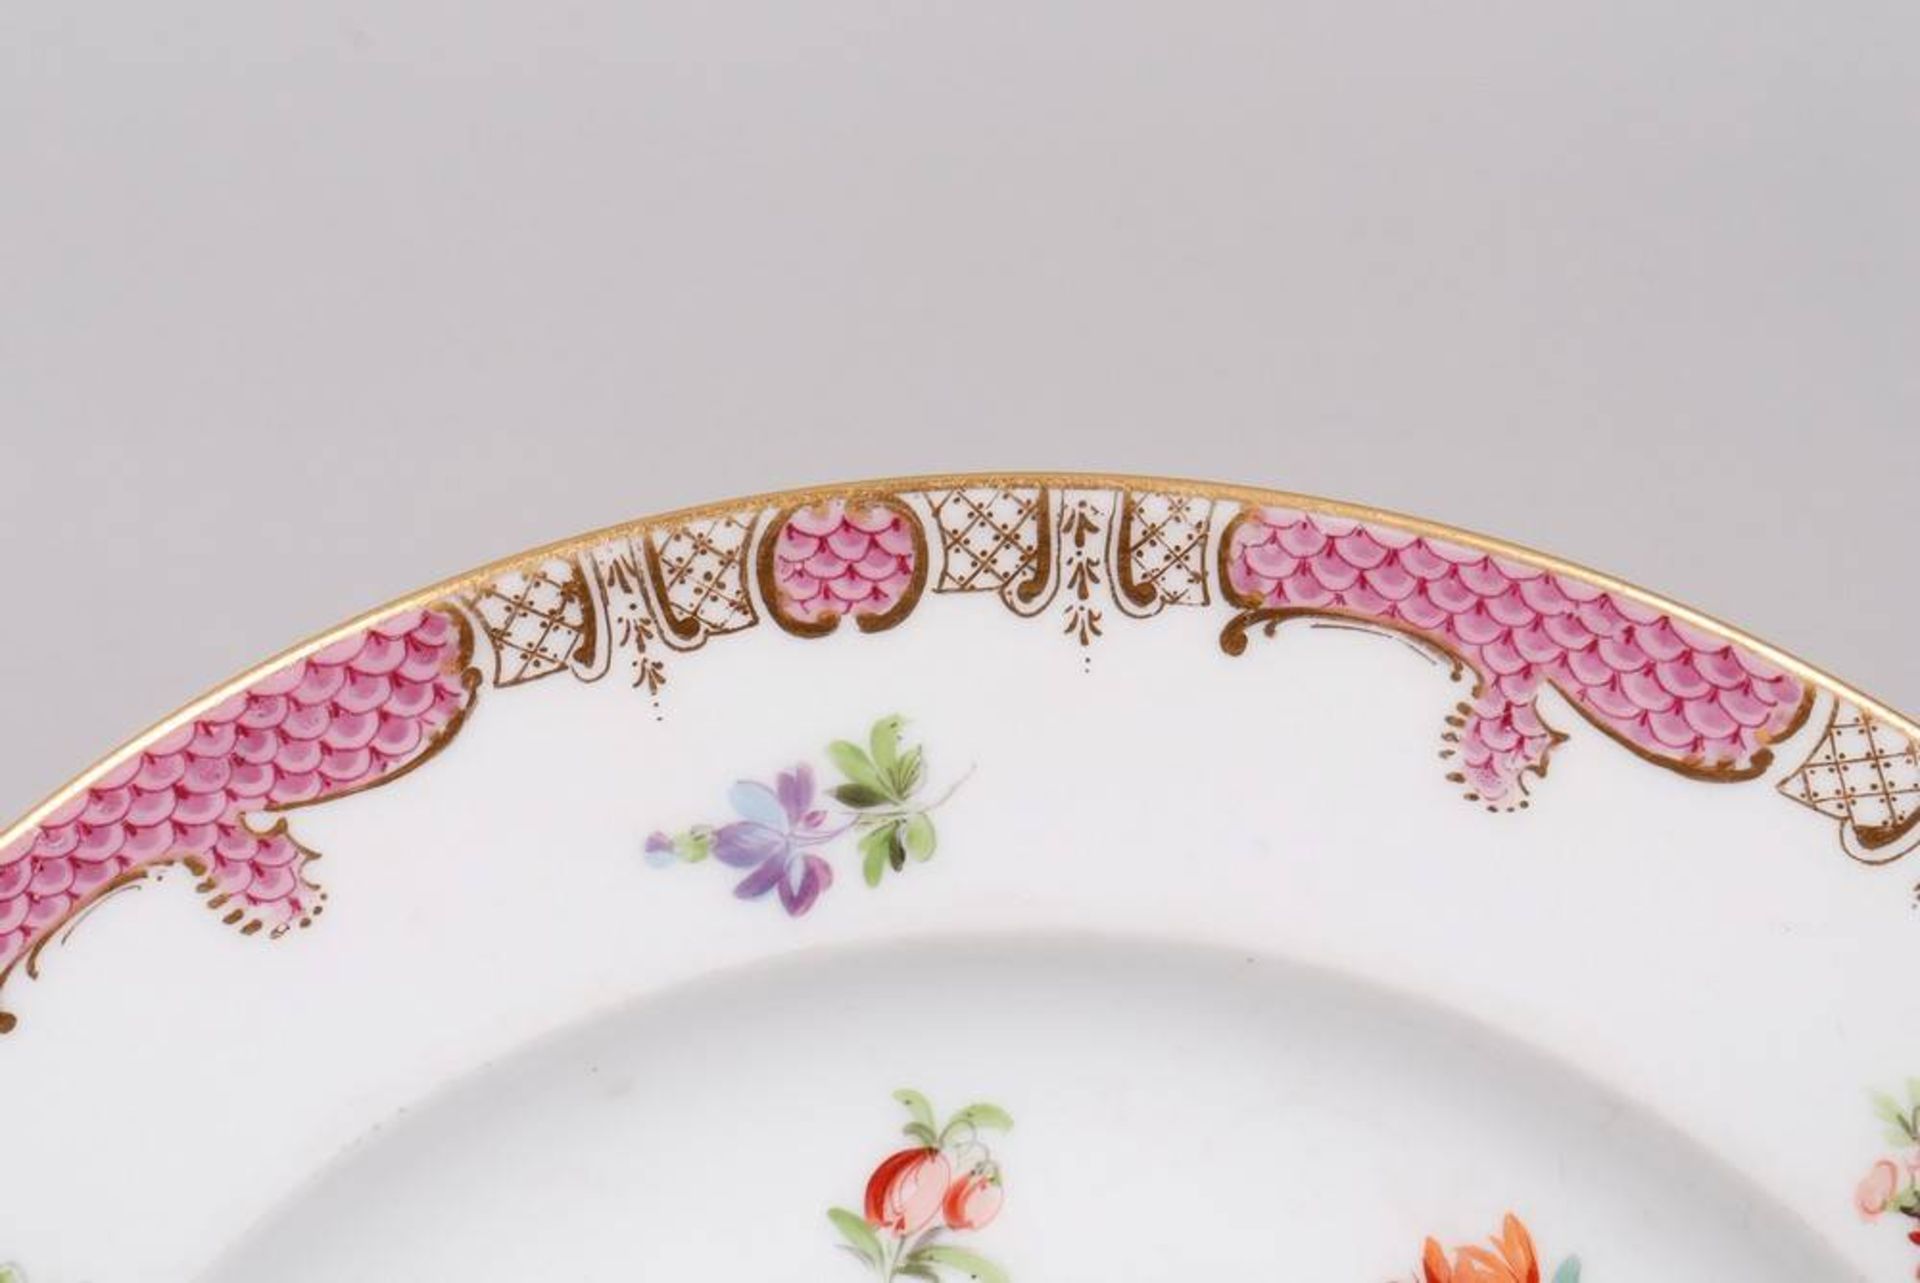 Plate, Meissen, early 19th C., "Streublümchen" decor with purple scale pattern - Image 3 of 6